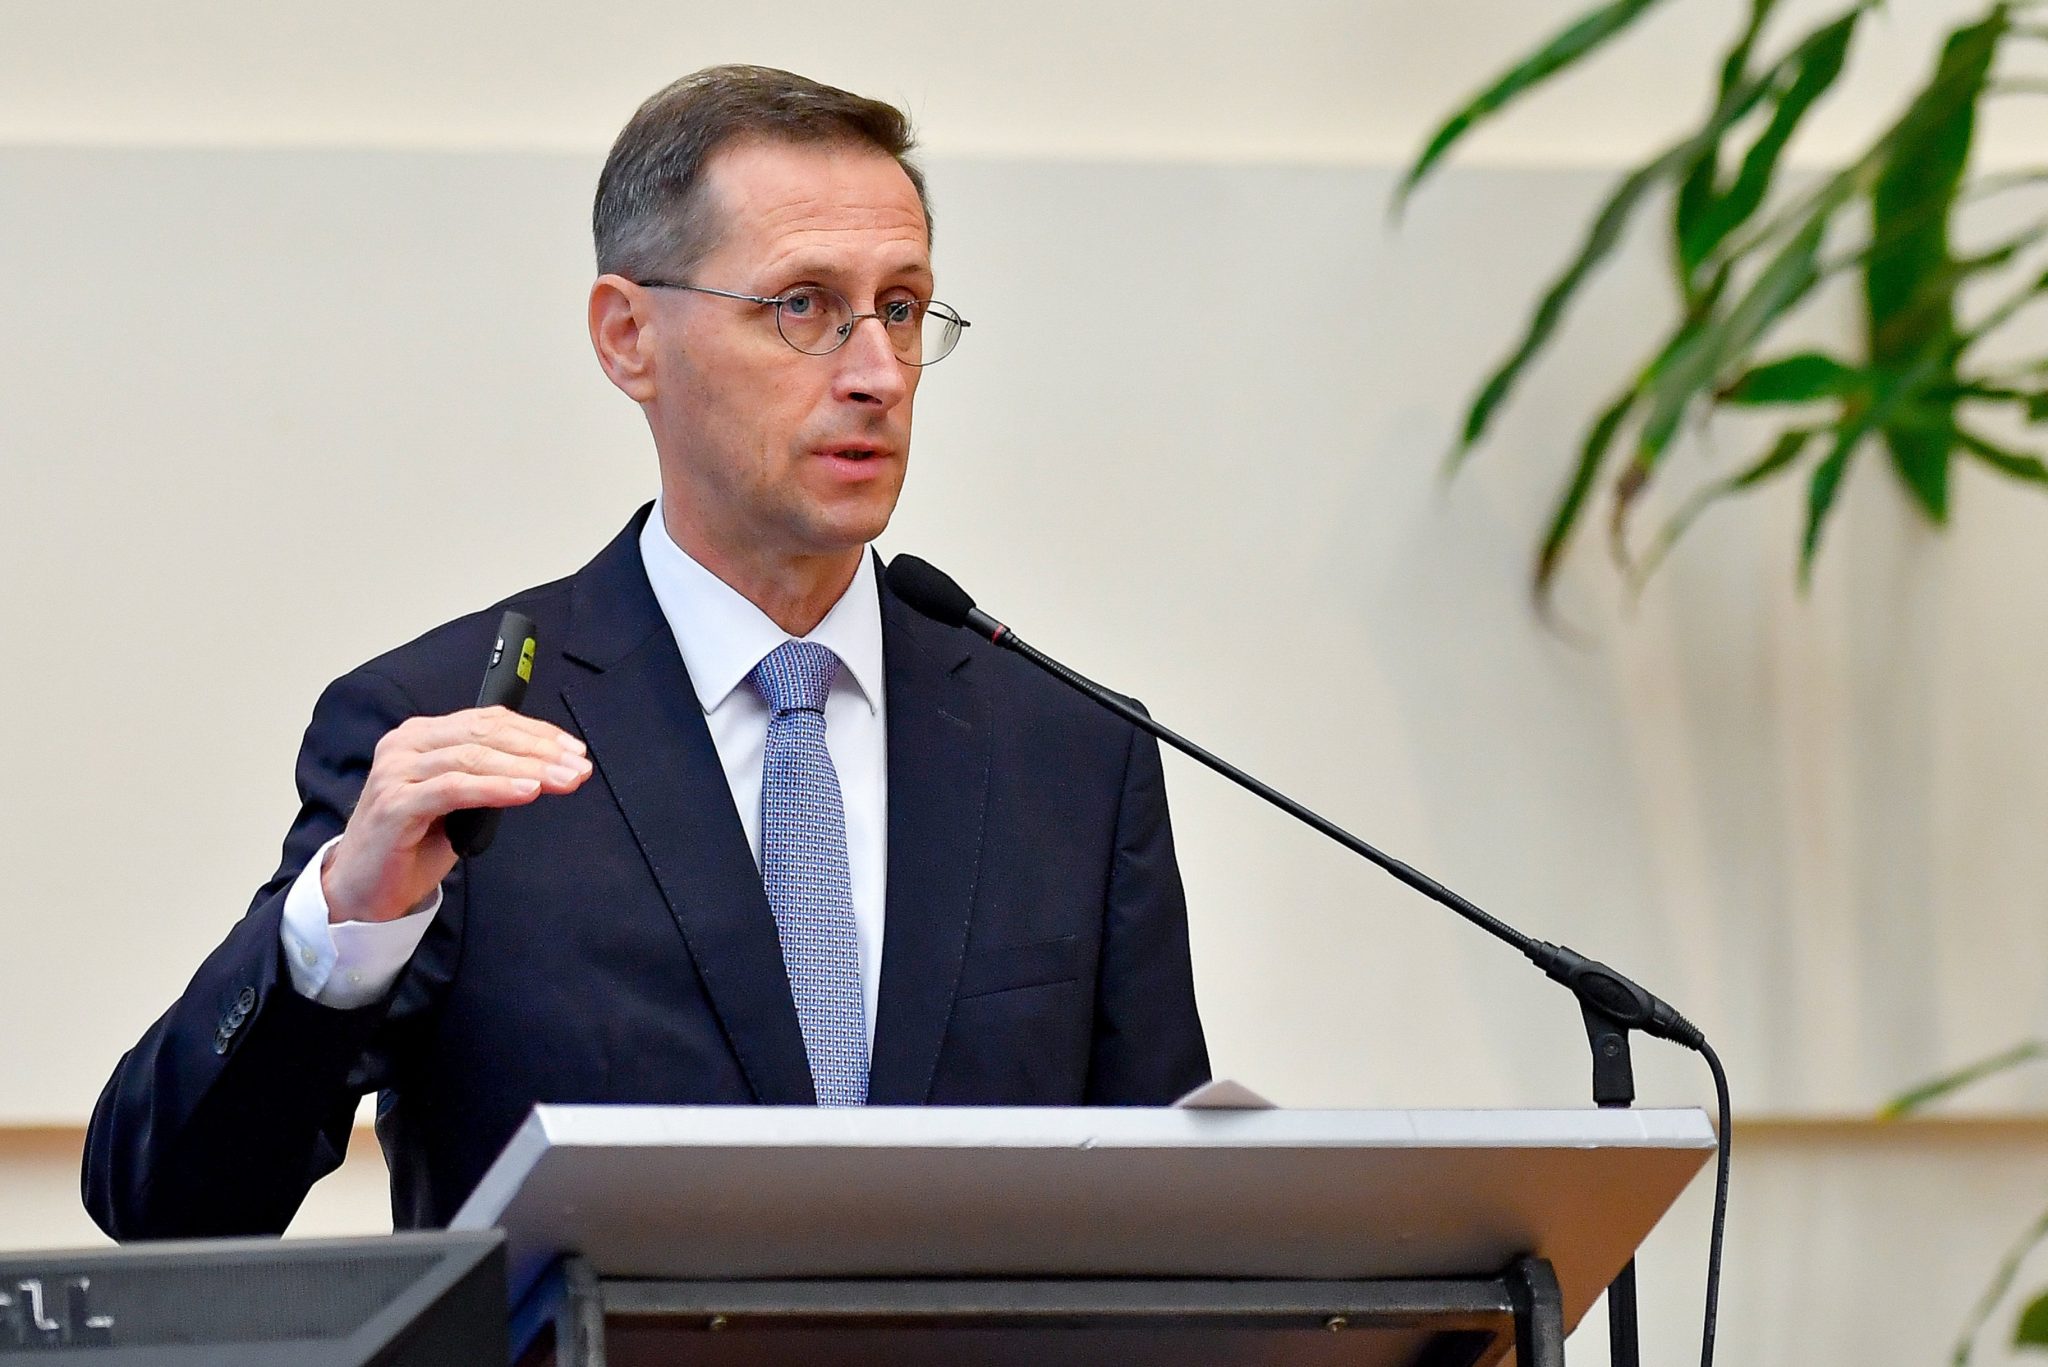 Finance Minister: Hungary's High Inflation Rate 'Temporary'